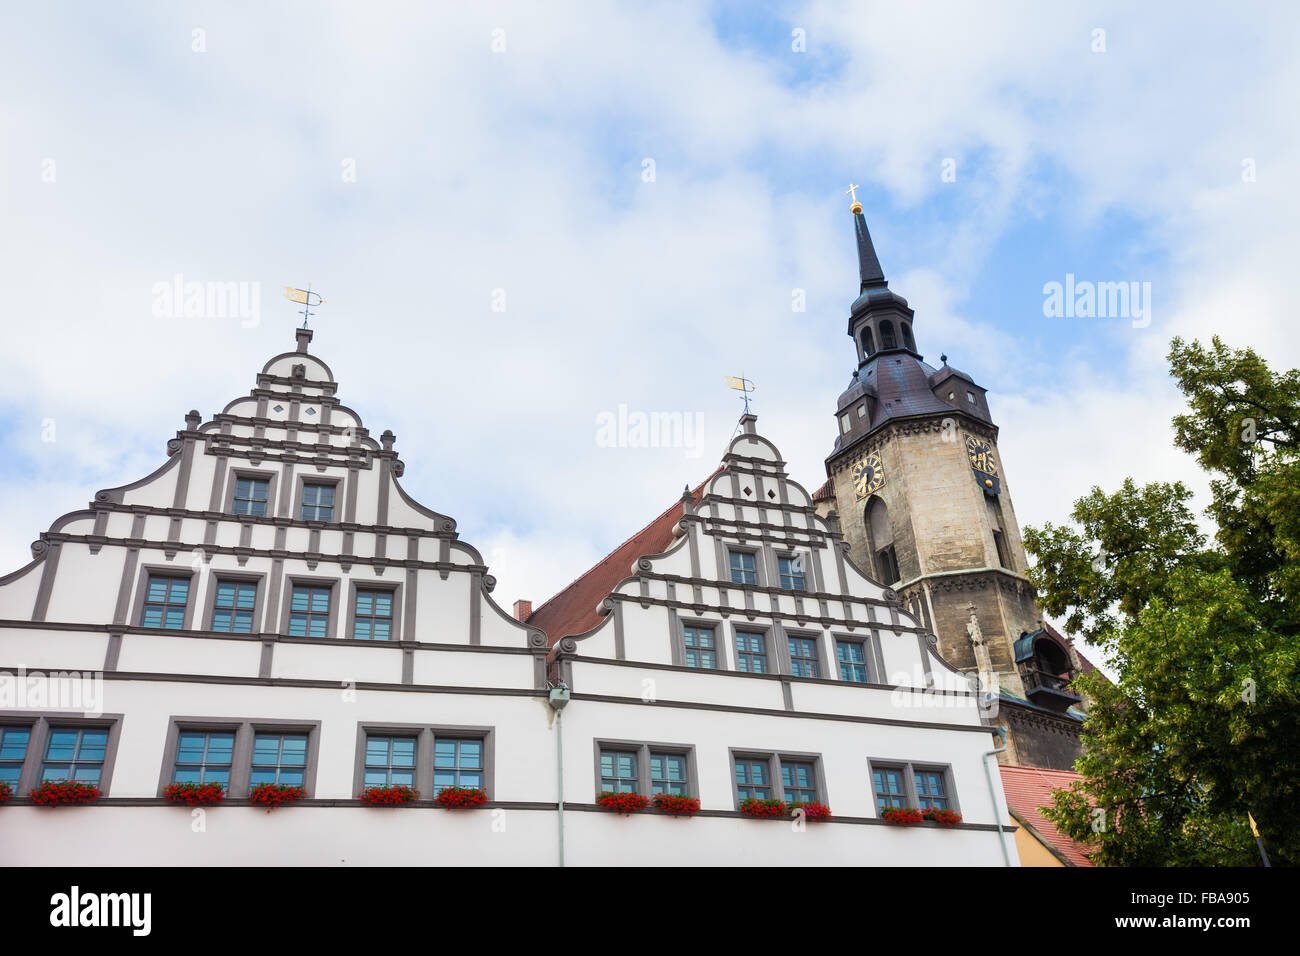 Amtsgericht (Courthouse) in Naumburg an der Saale, Germany, with St. Wenzel church Stock Photo